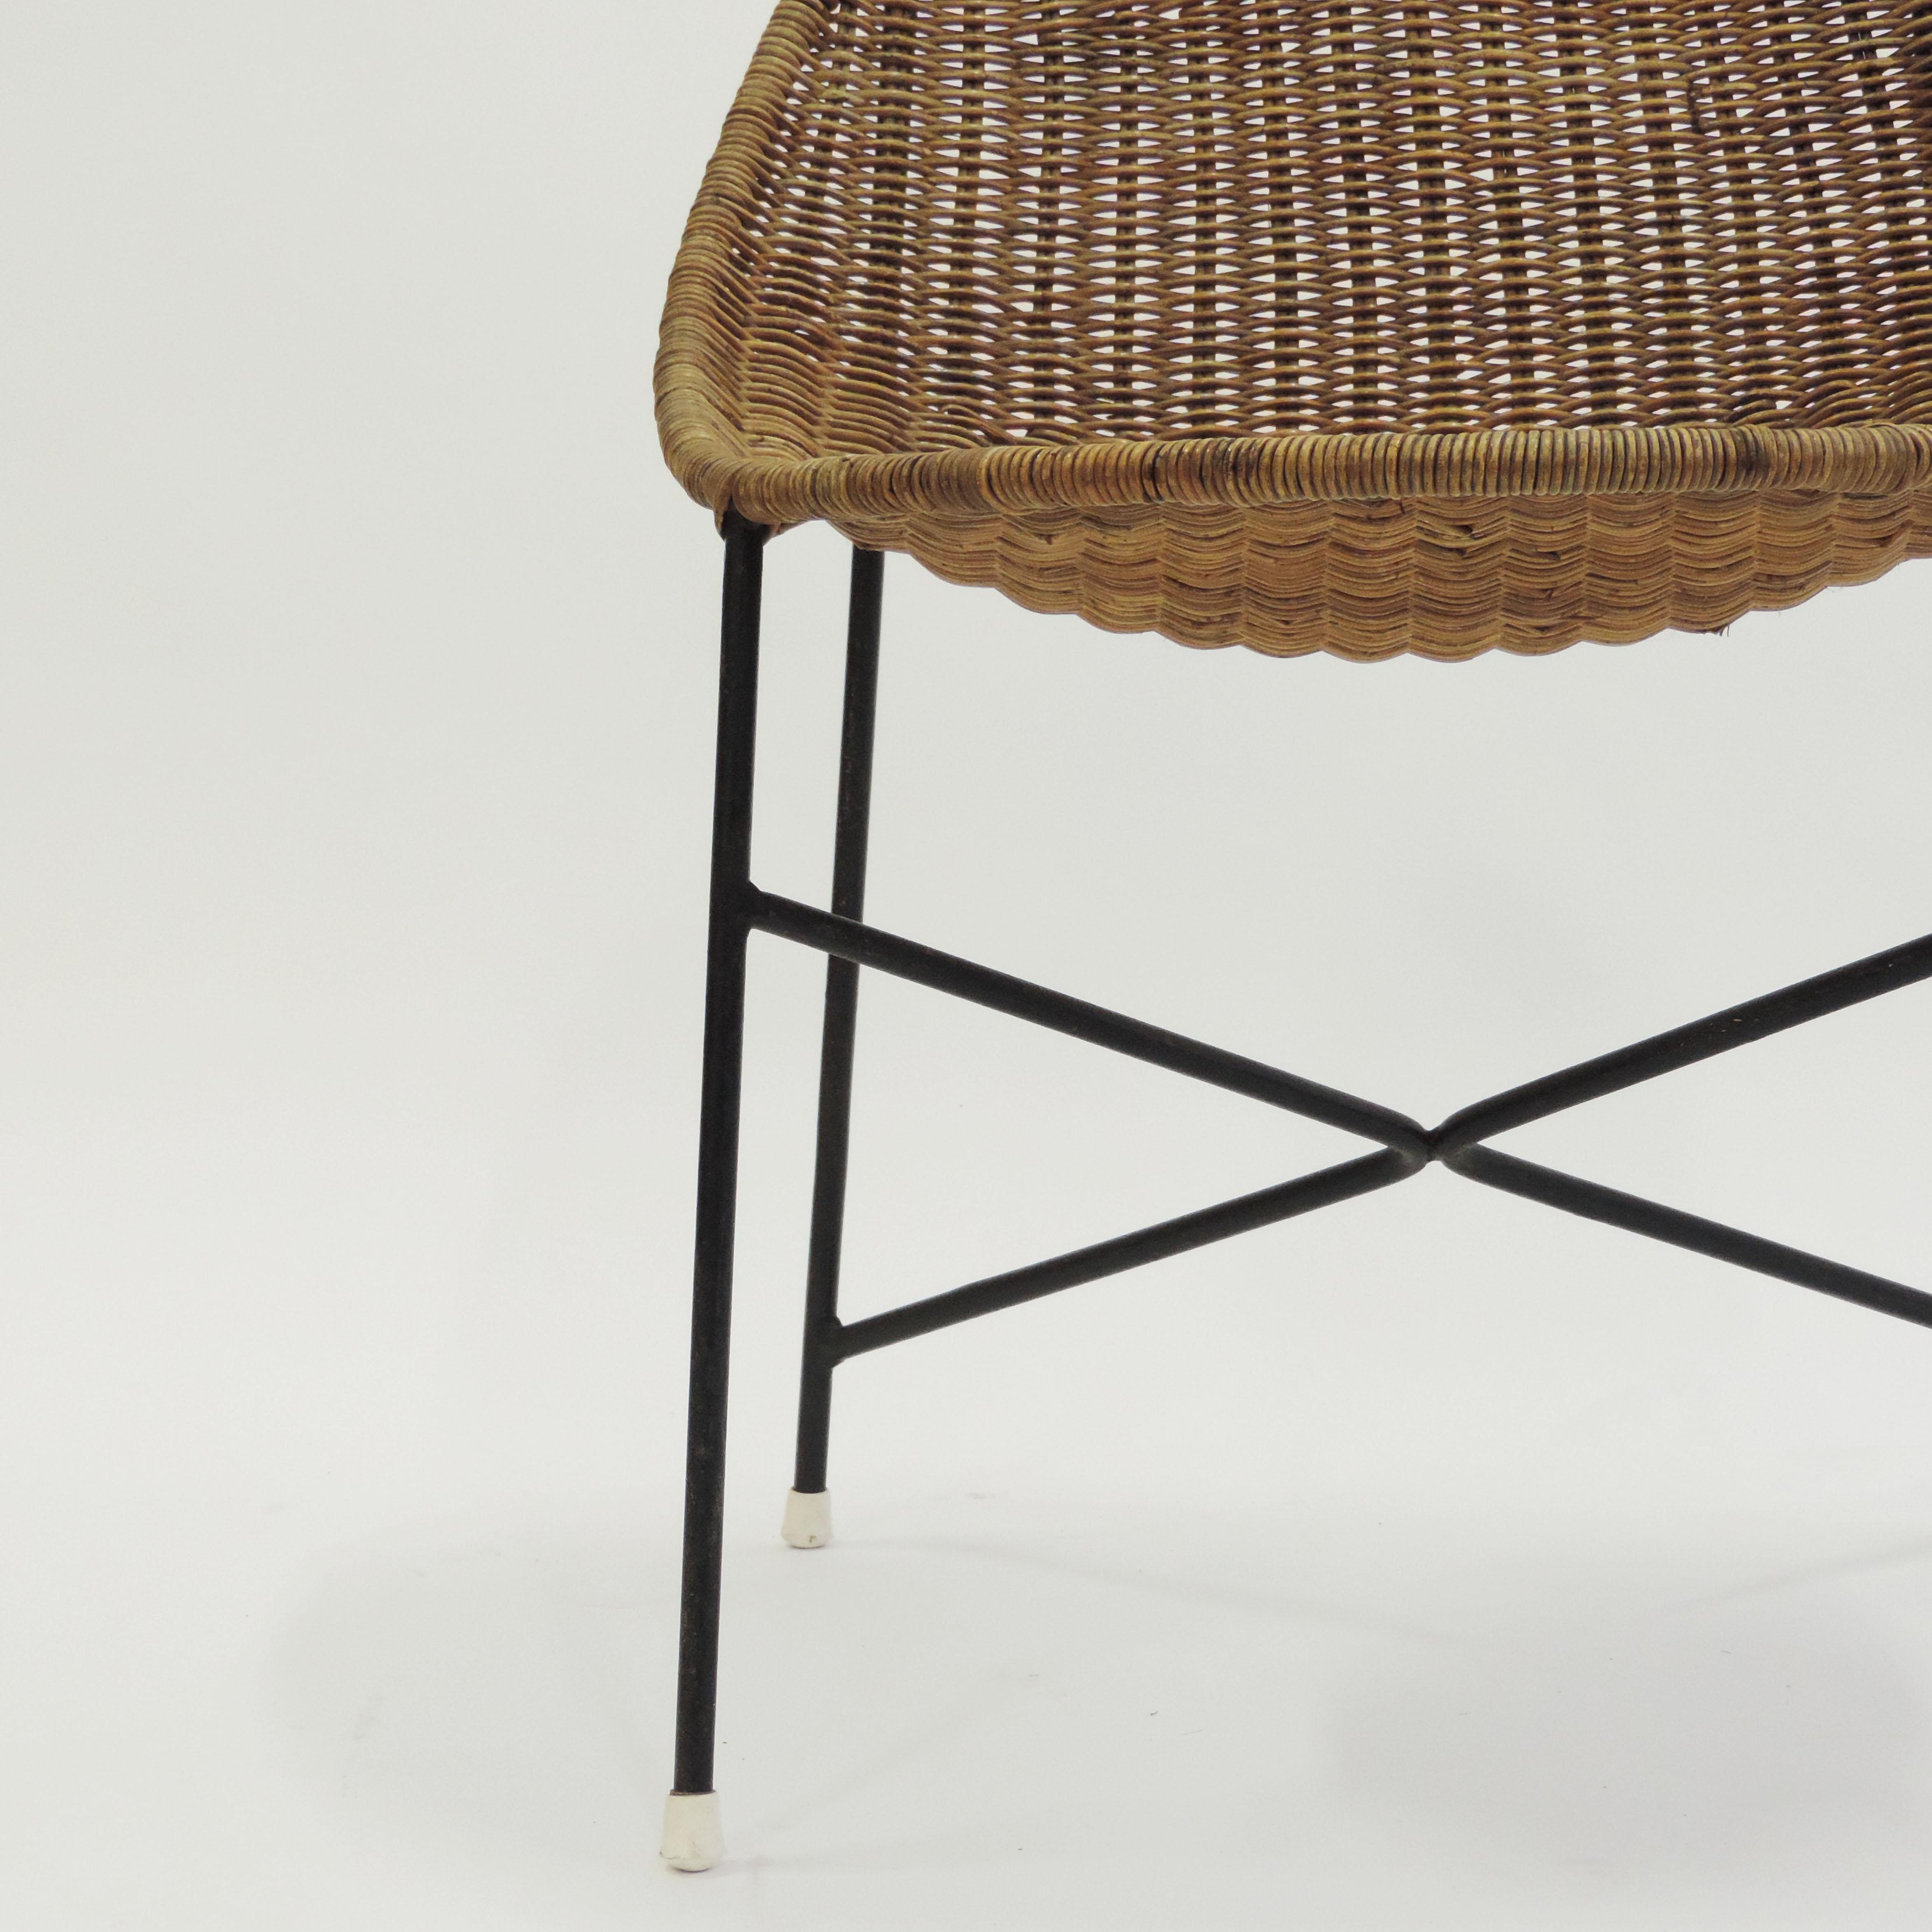 French duo Georges and Hermine Laurent Wicker and Metal Chair, 1950s For Sale 3